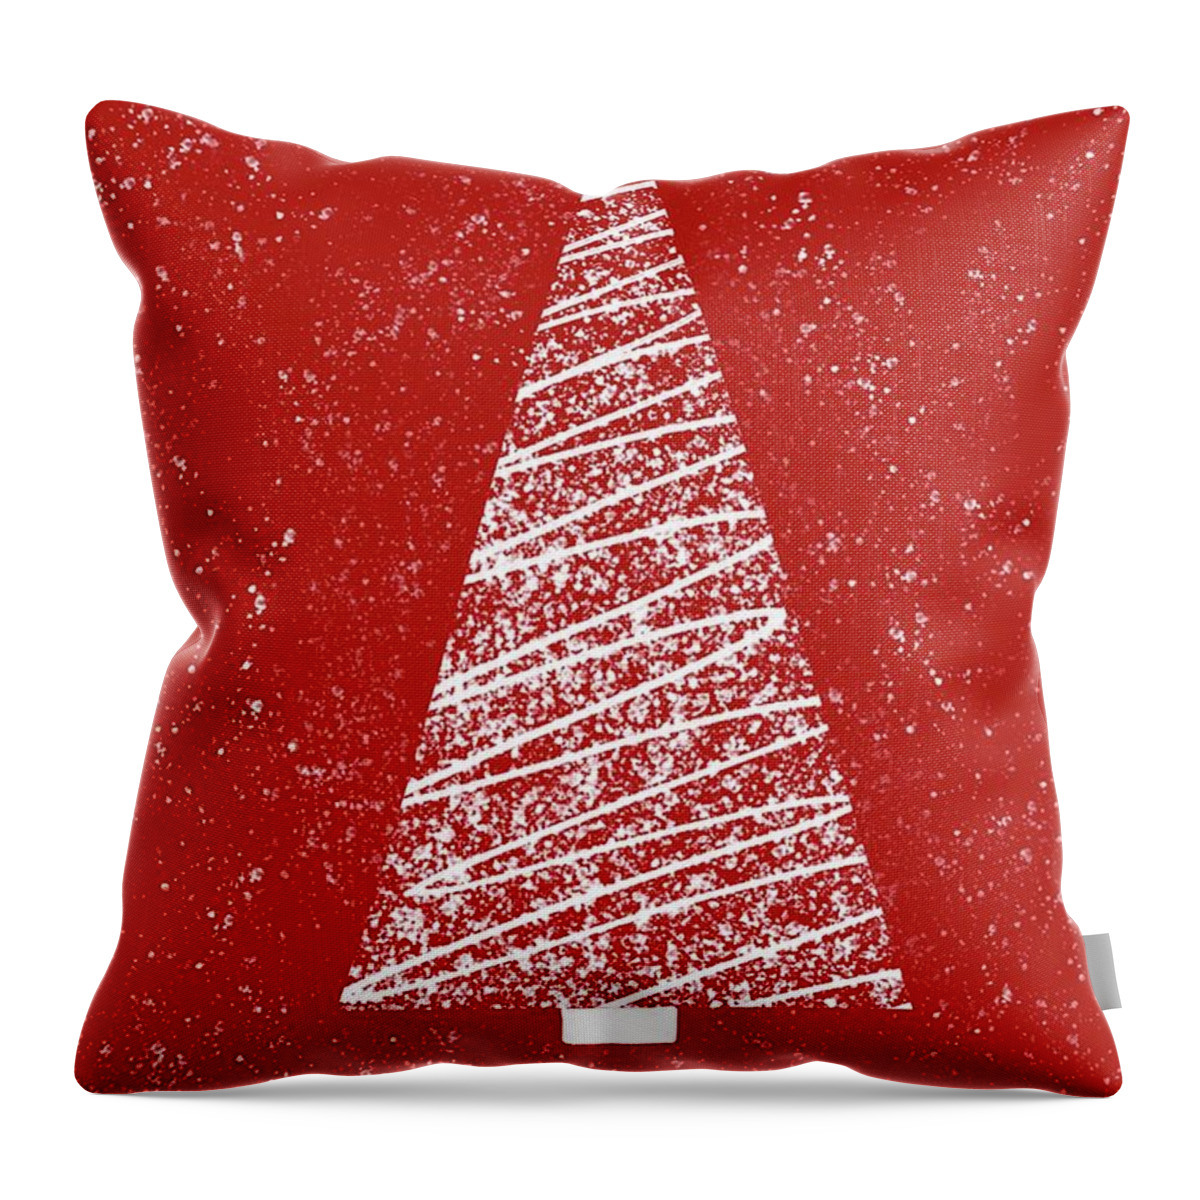 Christmas Throw Pillow featuring the digital art Christmas Holidays by Bnte Creations